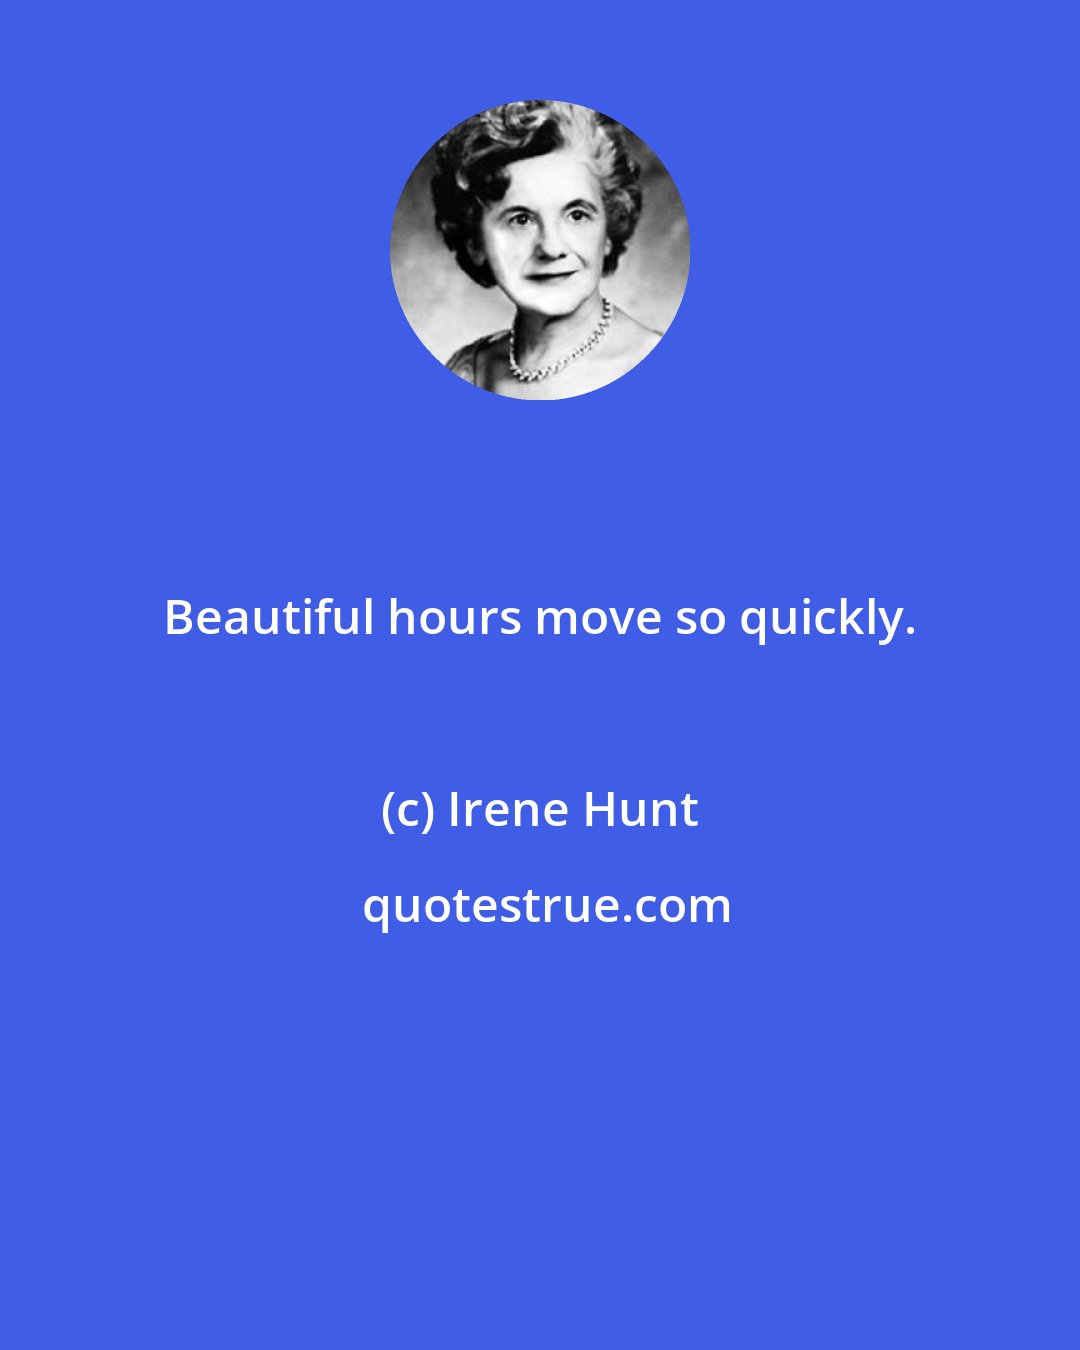 Irene Hunt: Beautiful hours move so quickly.